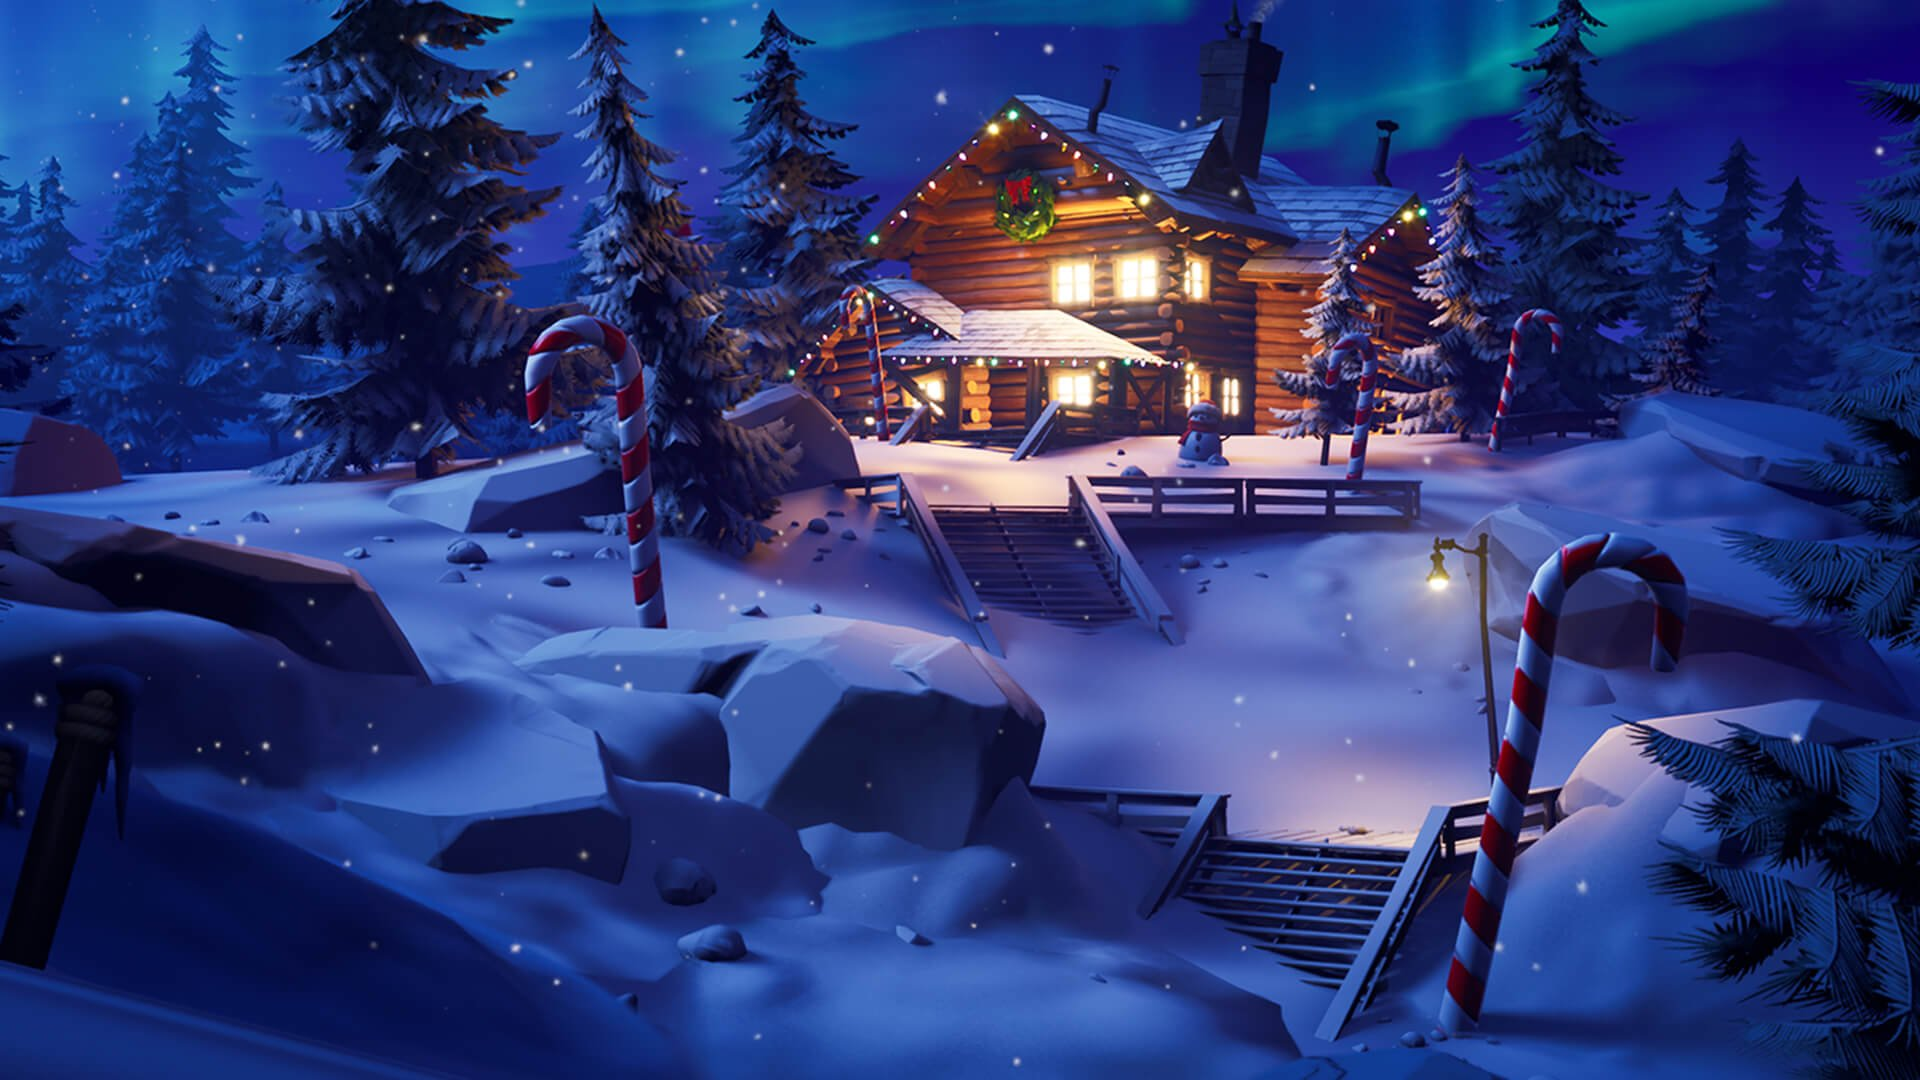 Patch Notes for Fortnite 19.01 - Super Styles, Winterfest, Balance Changes & More